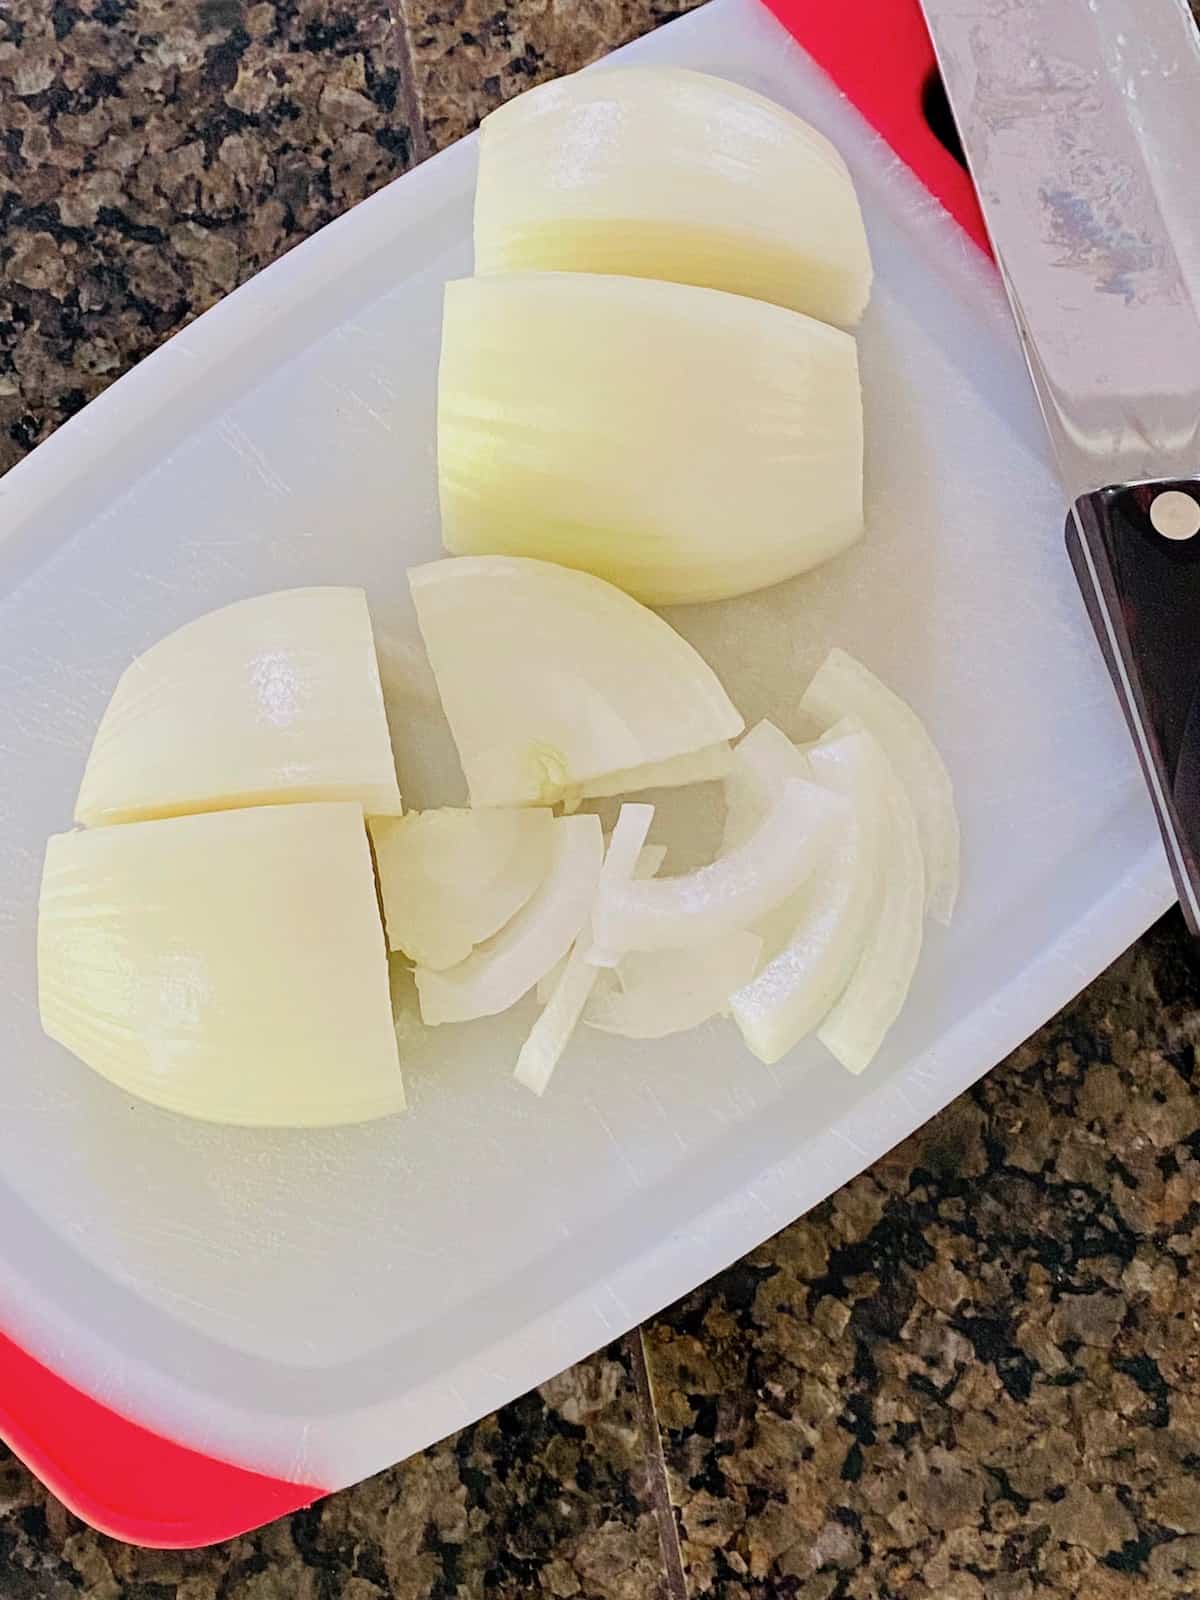 Onion cut into 4 pieces and then thinly sliced.